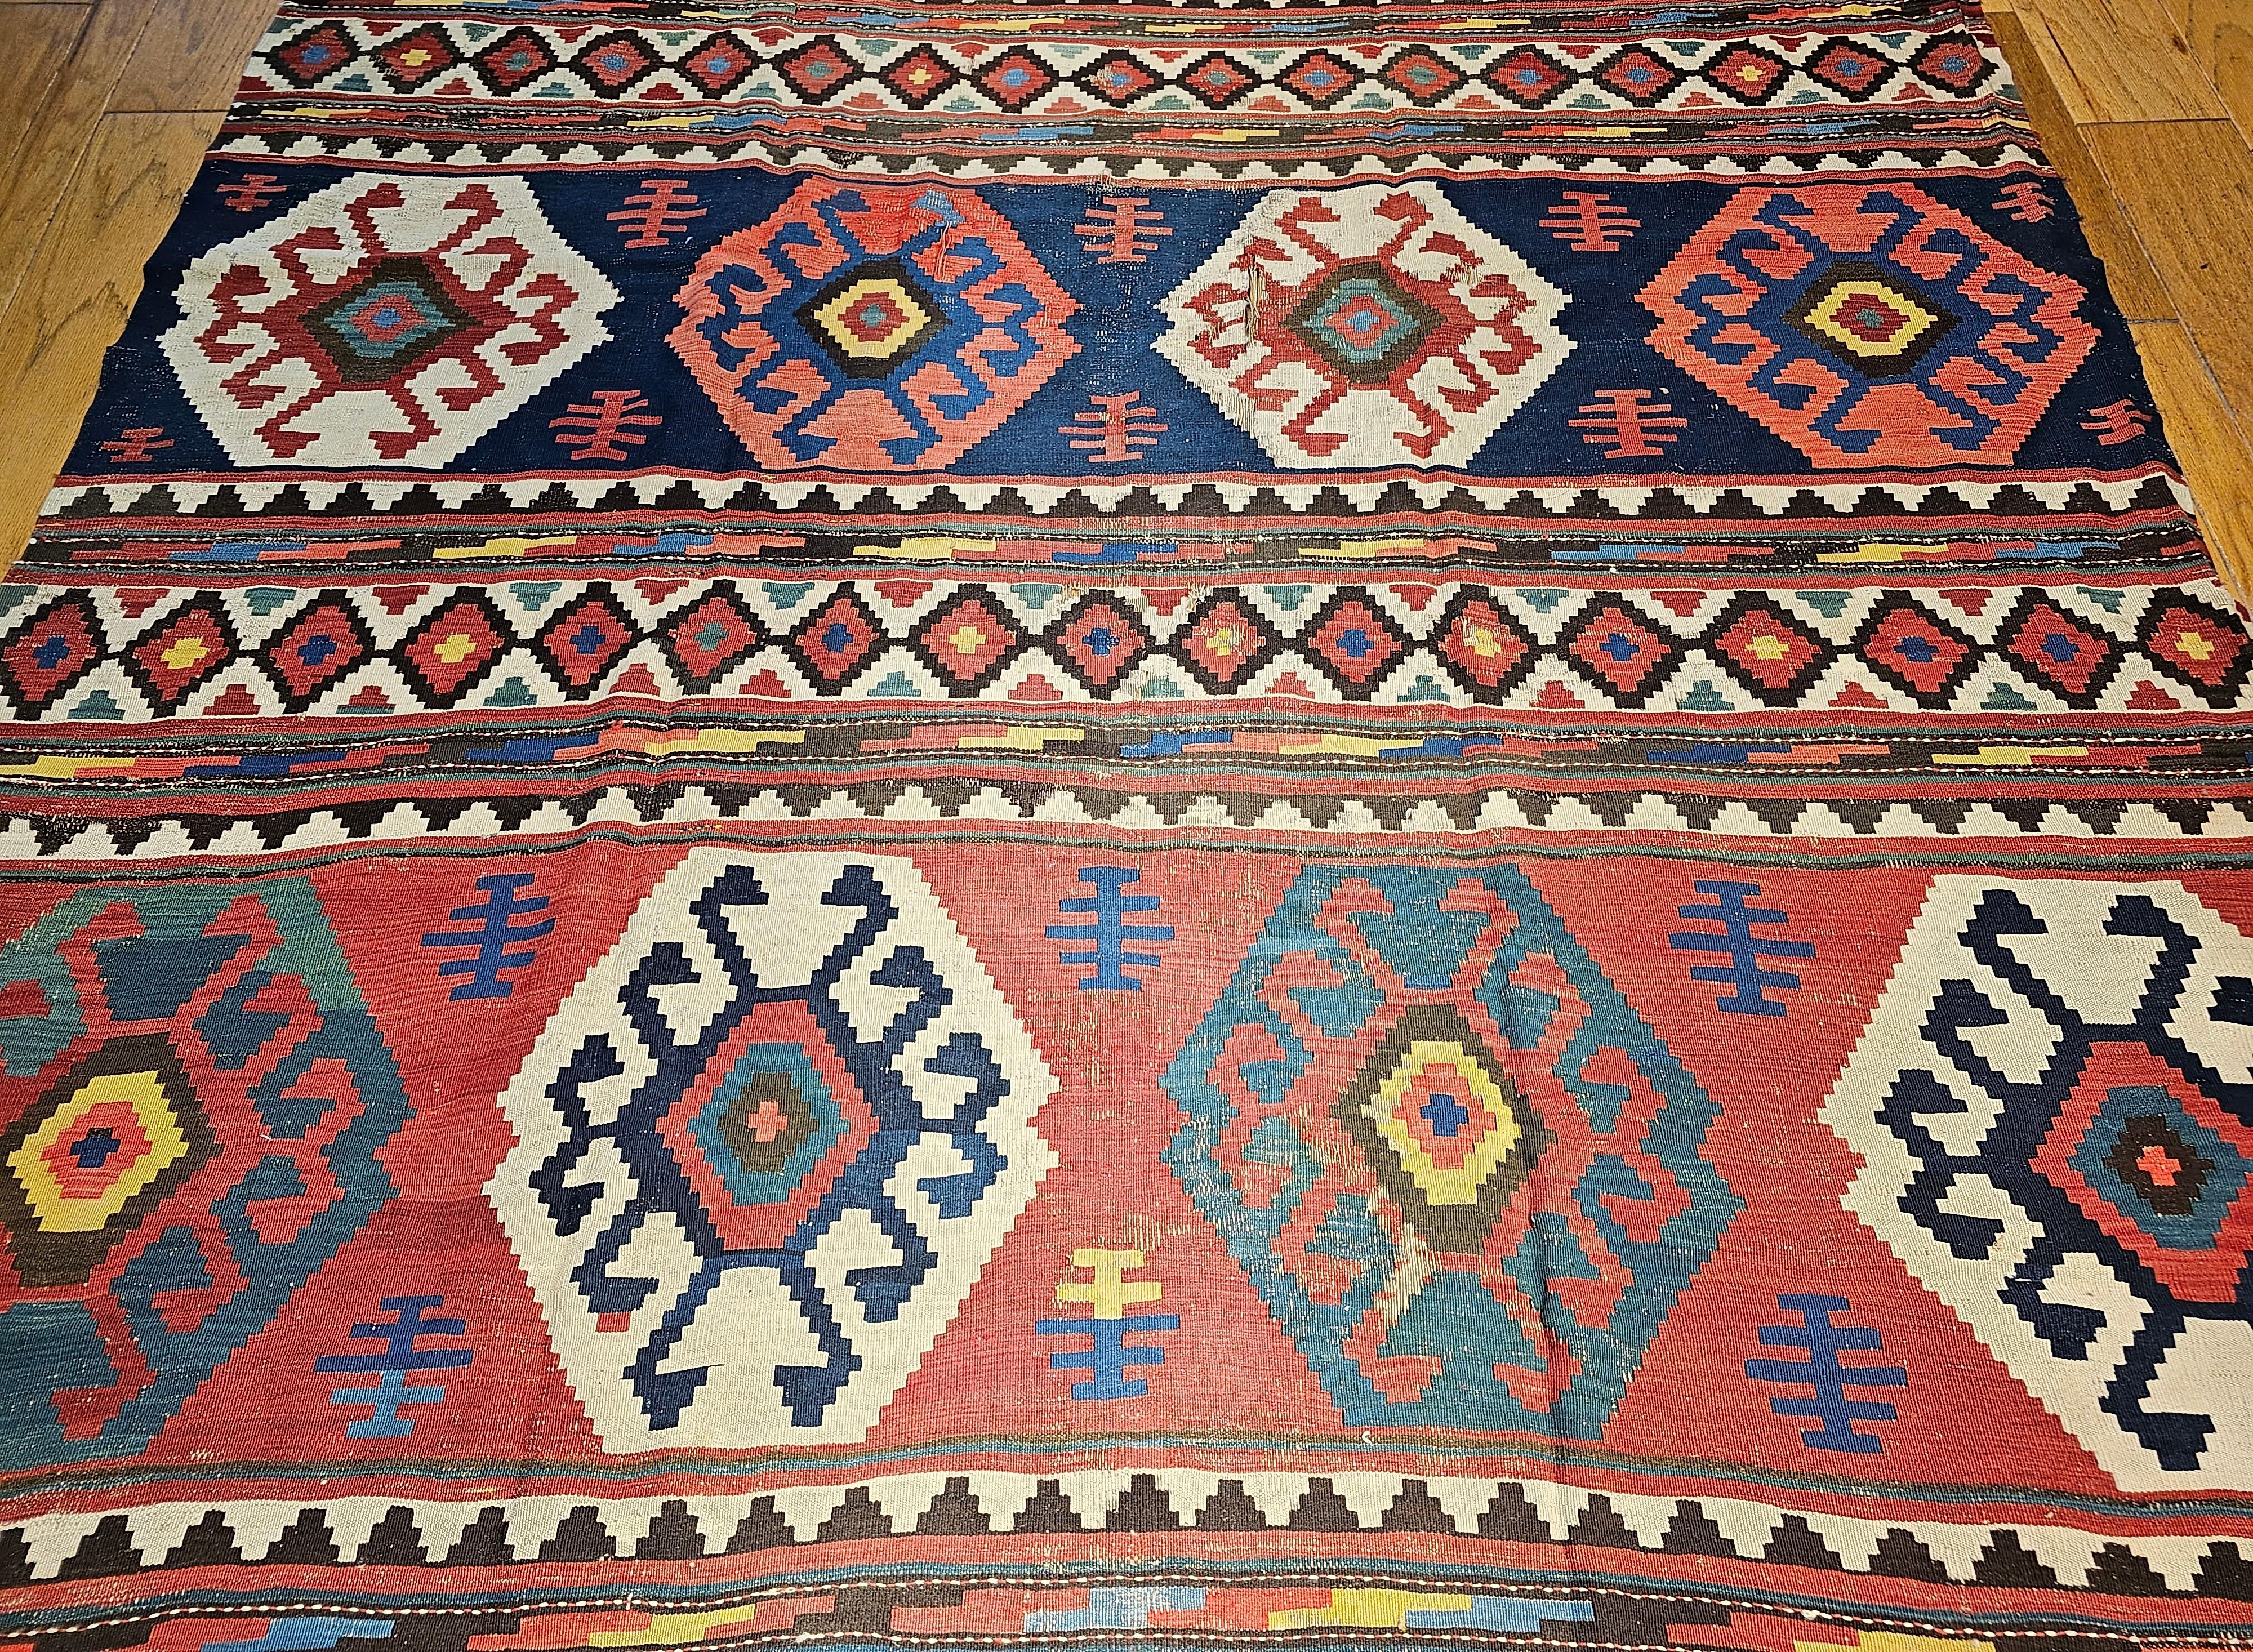 Vintage Caucasian Kazak Room Size Kilim in Blue, Green, Pink, Ivory, Navy In Good Condition For Sale In Barrington, IL